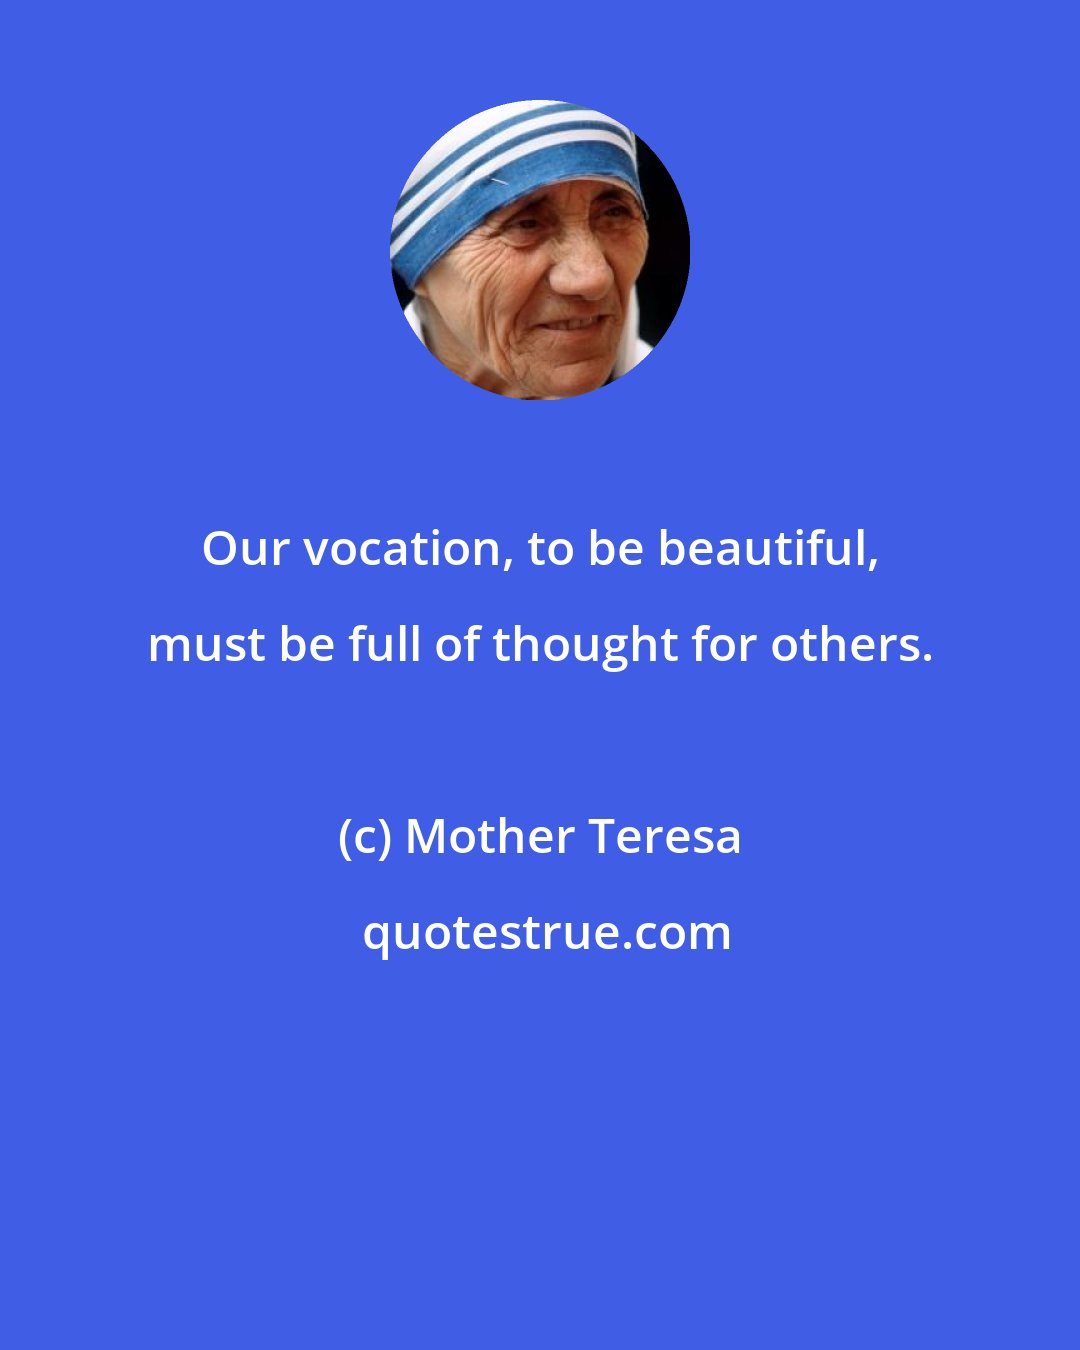 Mother Teresa: Our vocation, to be beautiful, must be full of thought for others.